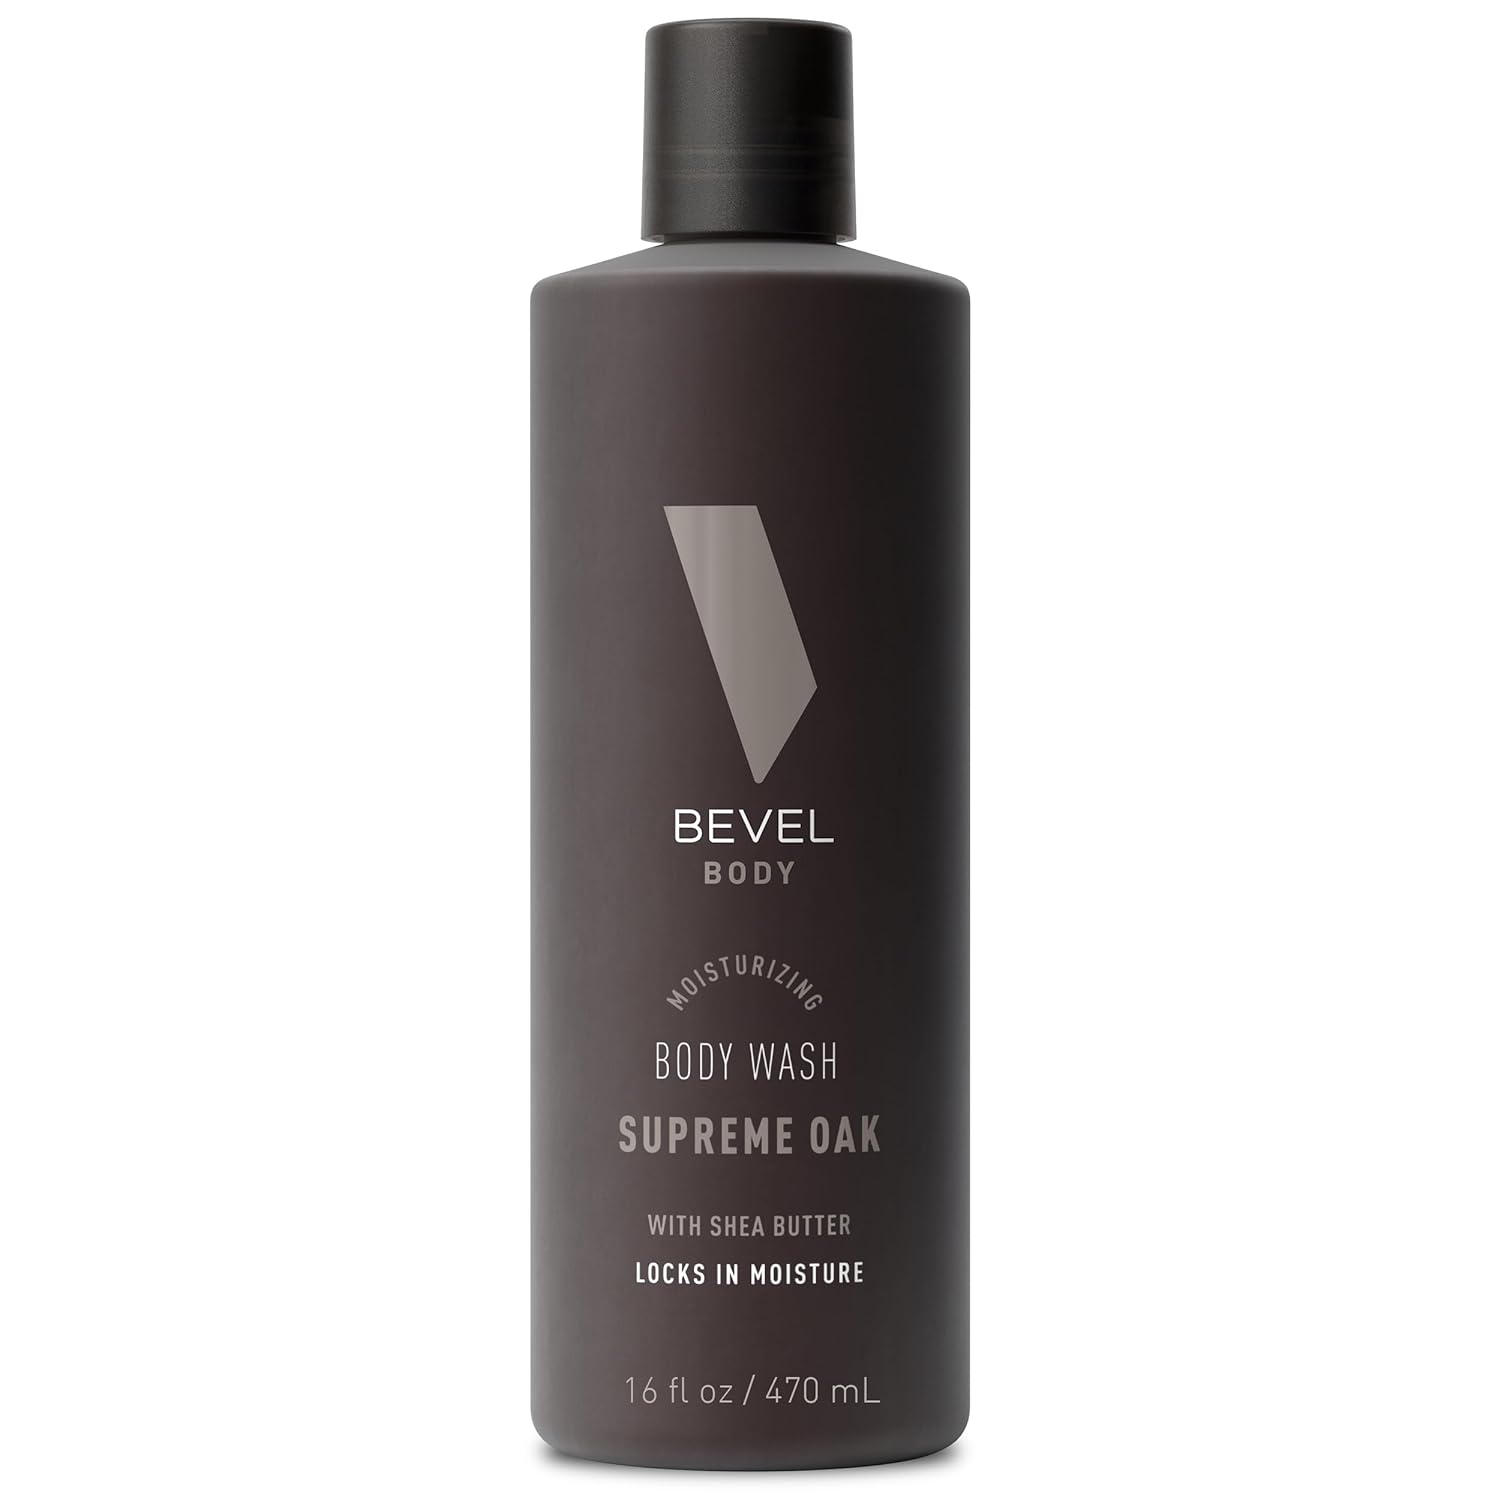 Bevel Moisturizing Body Wash for Men - Supreme Oak Scent with Shea Butter, Vitamin B, and Coconut Oil, 16